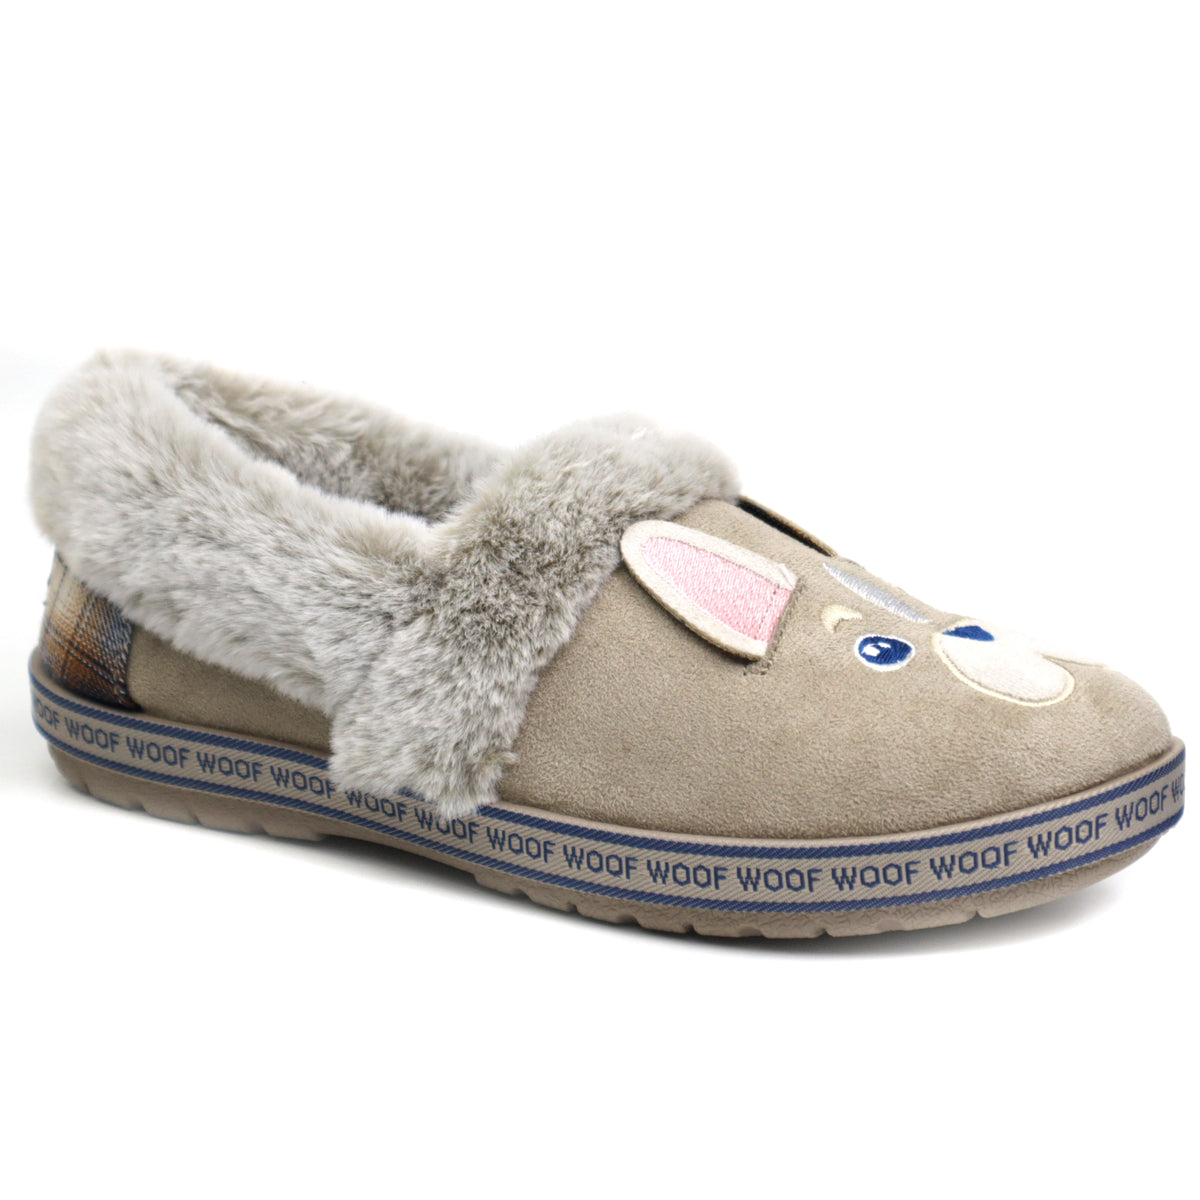 Skechers Papuci dama TOO COZY DOG 113482 TAUPE ID3186-TPE